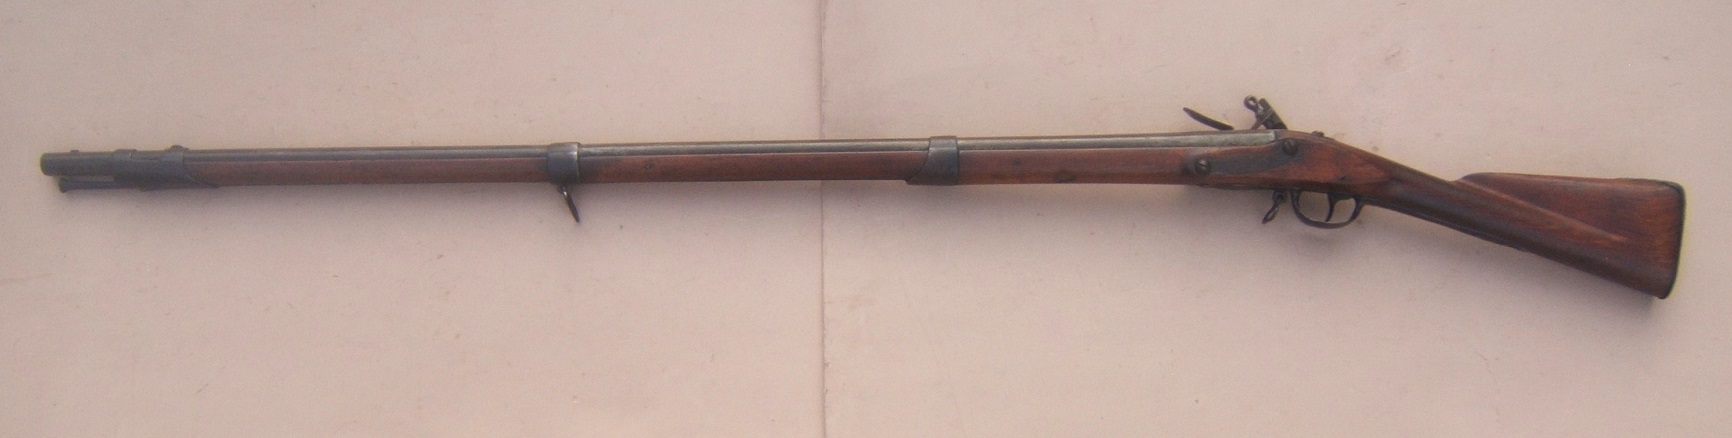 A VERY GOOD WAR of 1812 PERIOD US MODEL 1795/8 CONTRACT MUSKET, ca. 1798 view 2